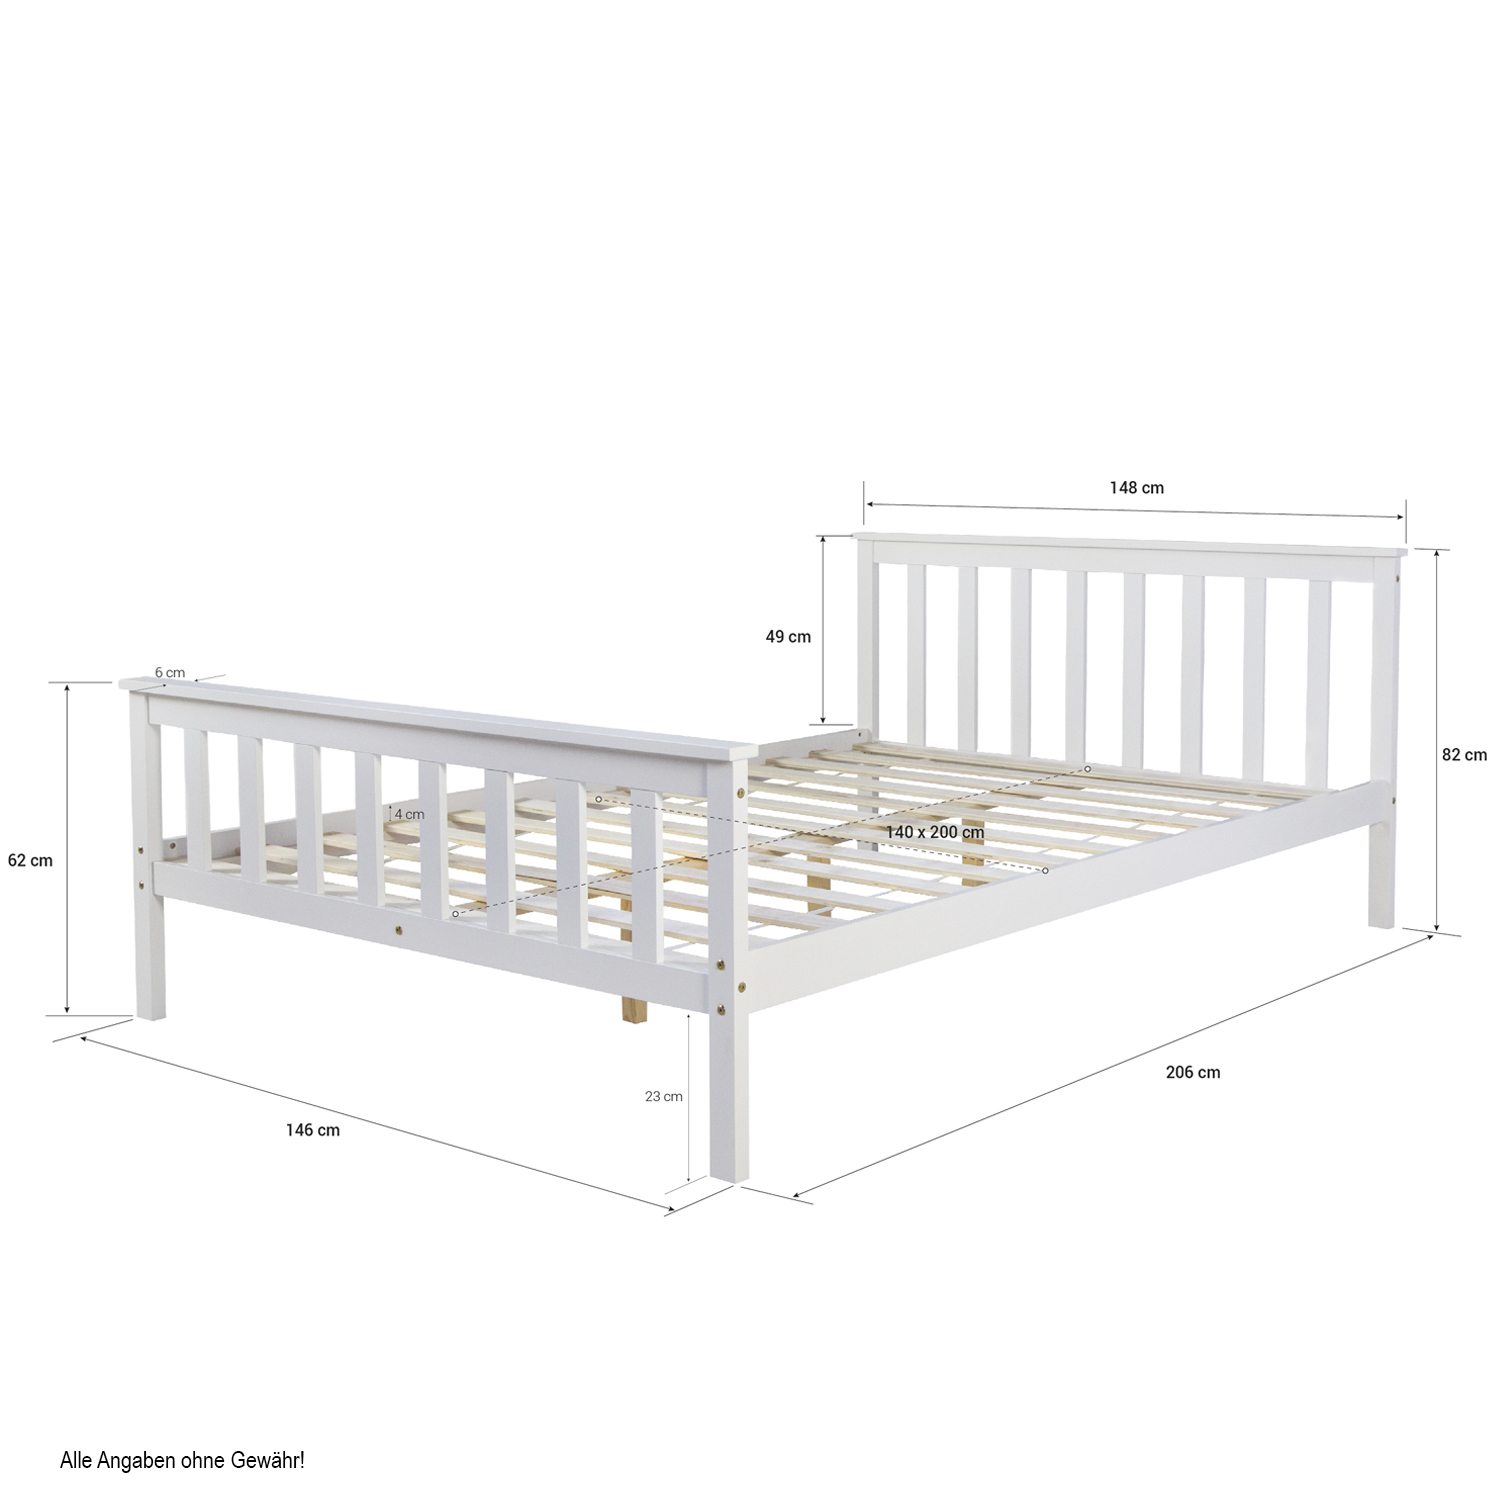 Wooden Bed White Natural 70 90 140 x 200 cm Double Bed Single Bed Youth